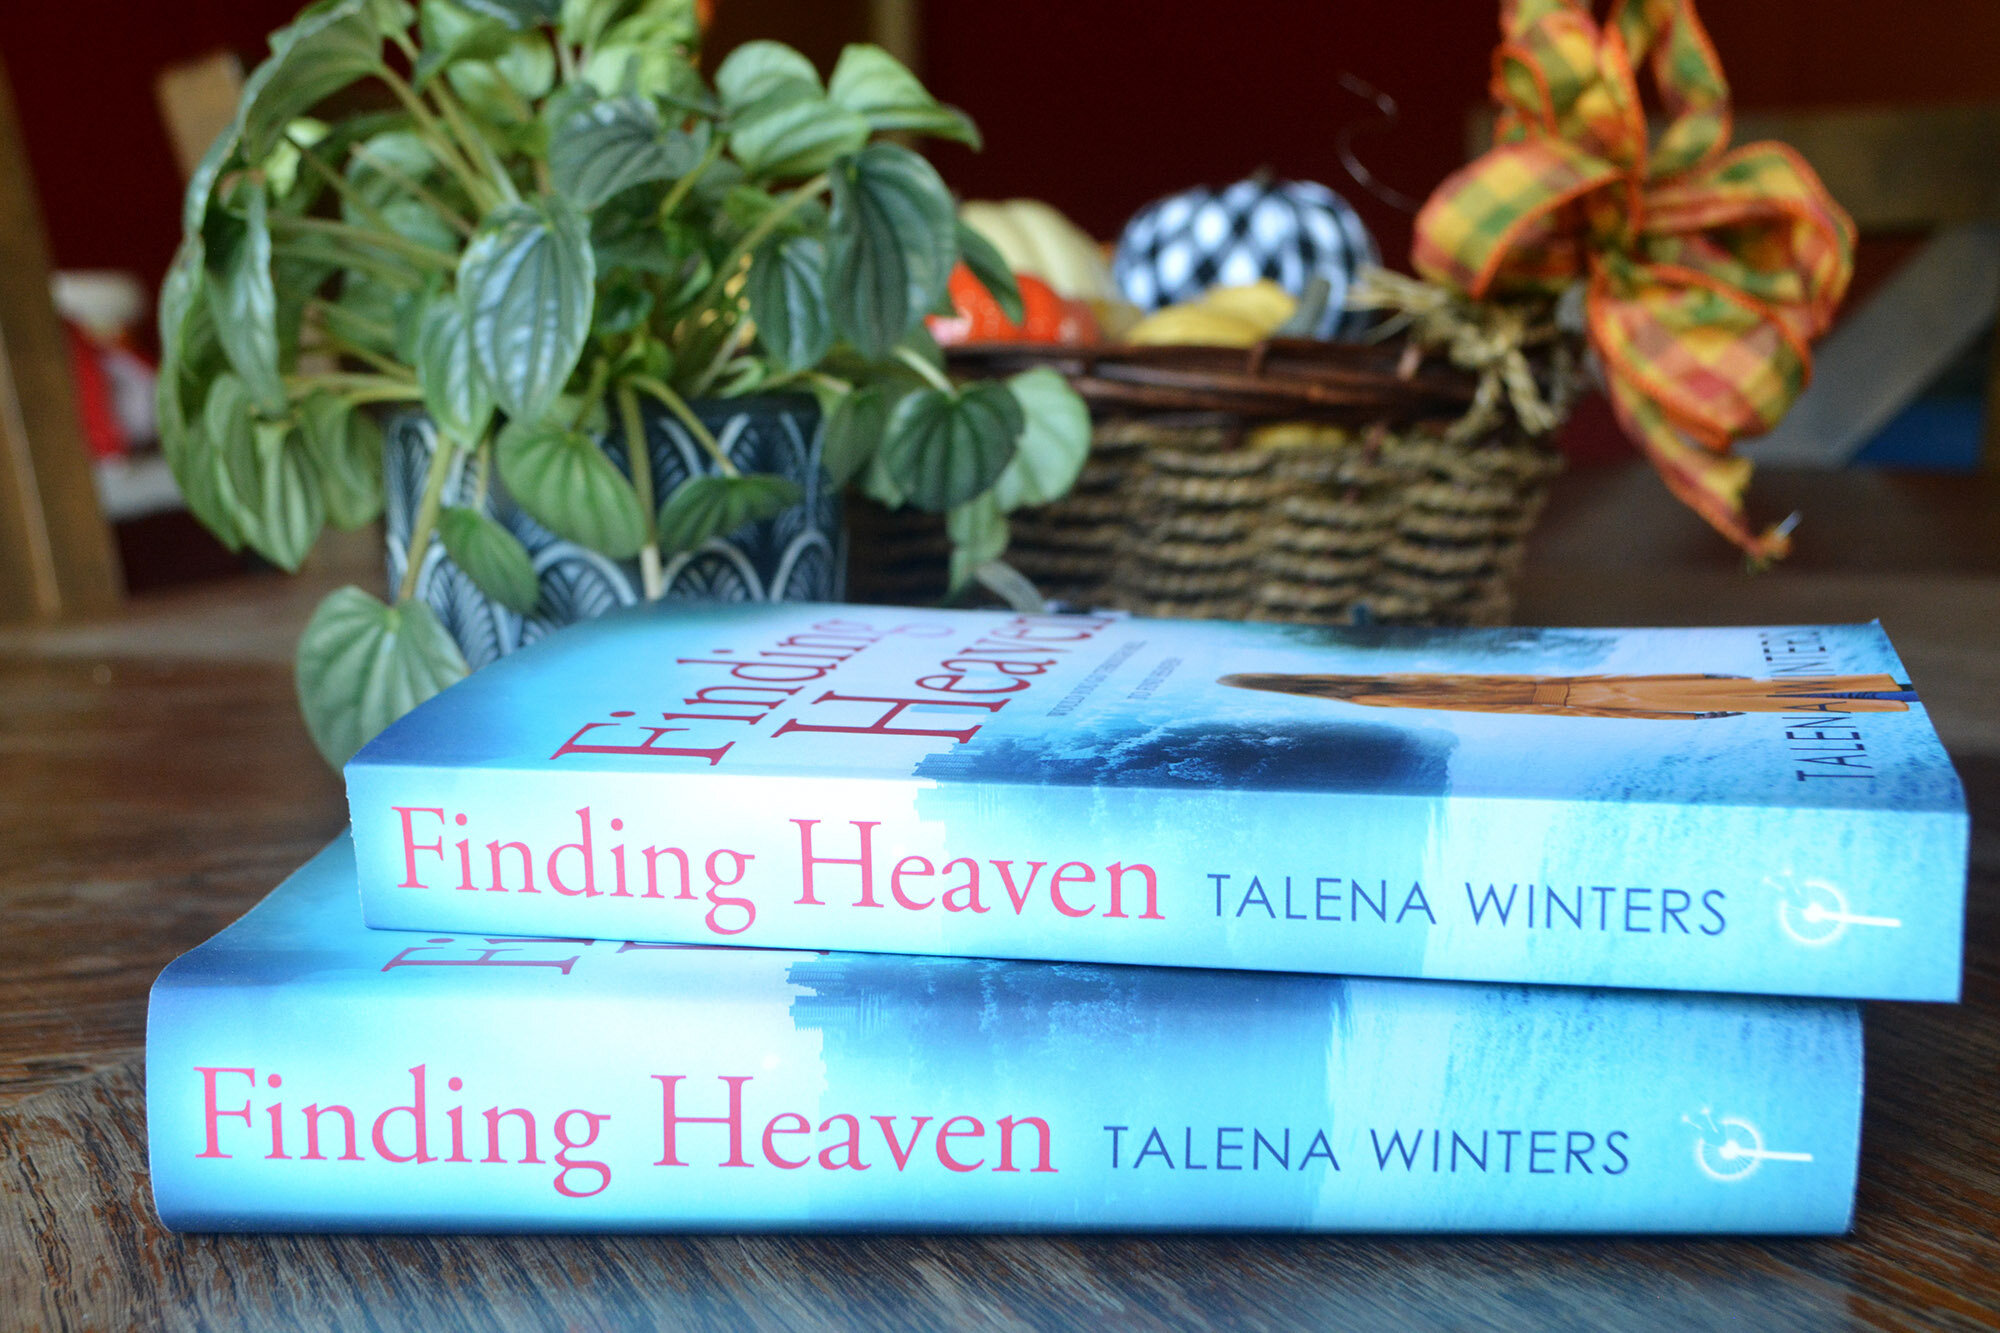  Spine view of book stack of  Finding Heaven  by Talena Winters. New cover edition now available in hardcover and paperback. “Would you go through hell to find heaven?” 